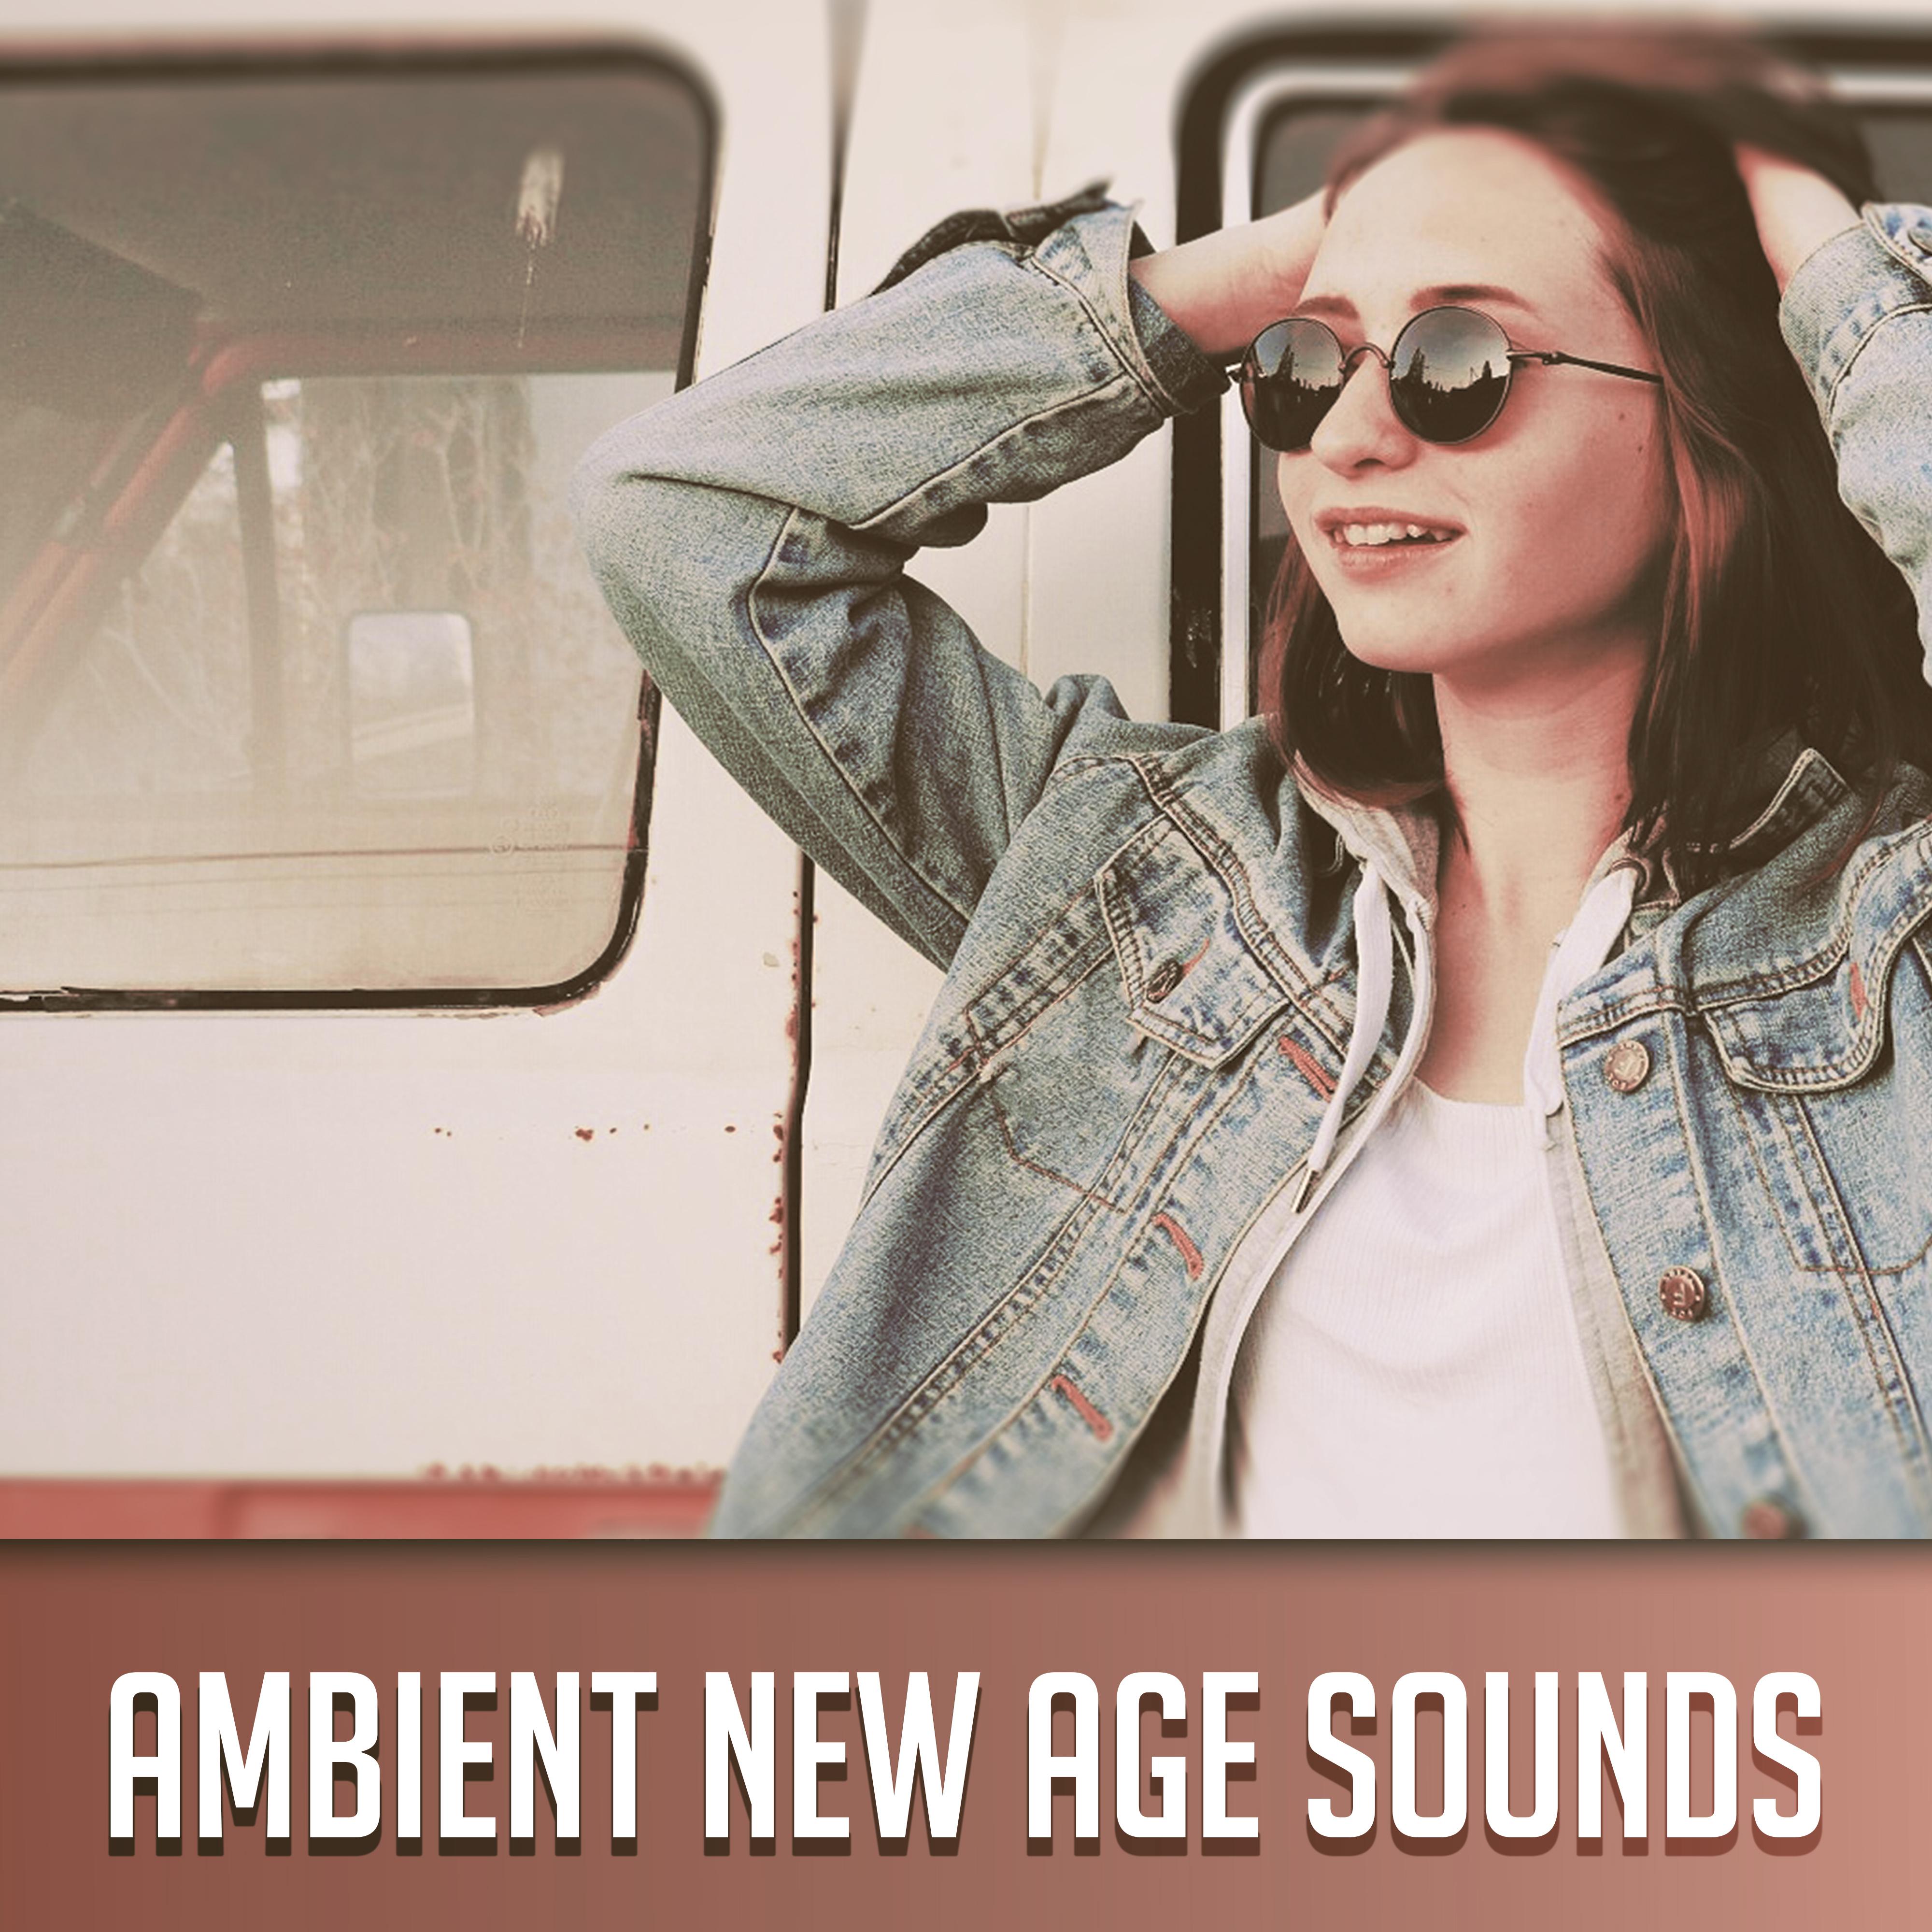 Ambient New Age Sounds – Calming Waves, No More Stress, Soothing Music to Relax, Rest Yourself